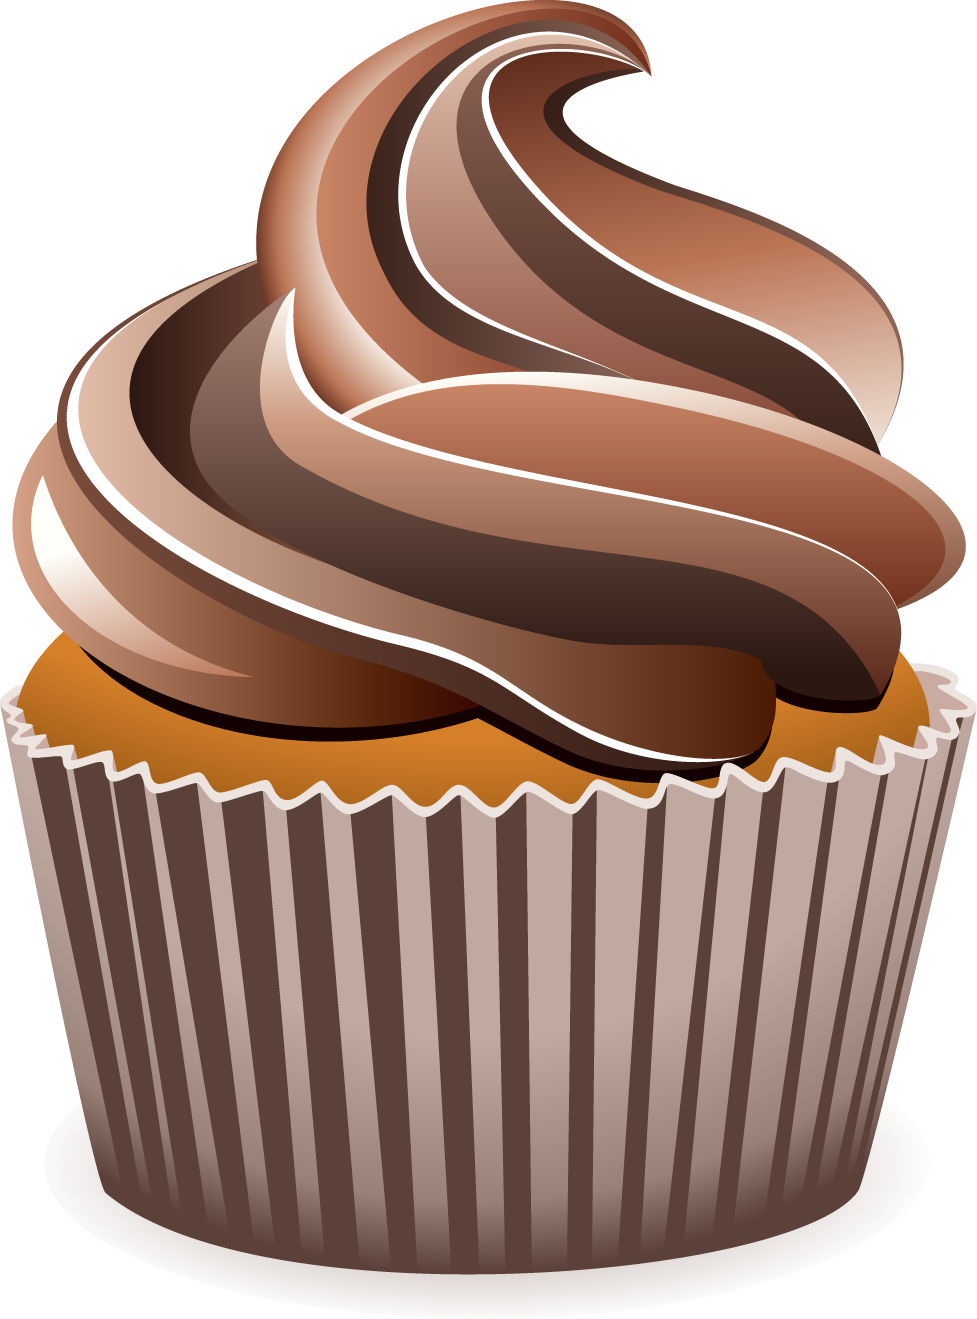 Clipart library: More Like Chocolate Cupcake Png by MaddieLovesSelly